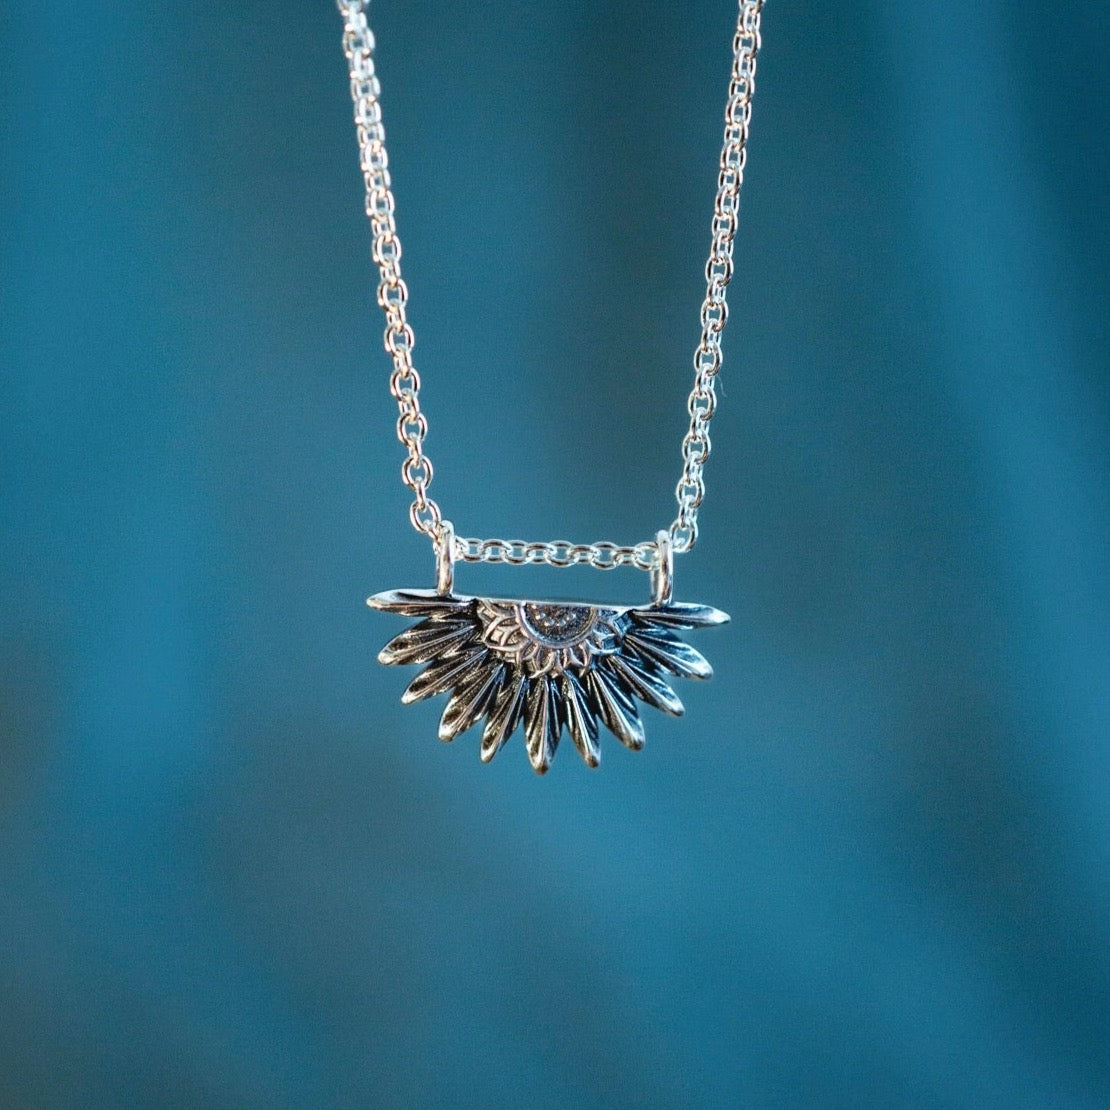 925 Silver Sunflower Necklace, Silver Flower Necklace,sun Flower Necklace,daisy  Necklace,dainty Silver Jewelry - Etsy